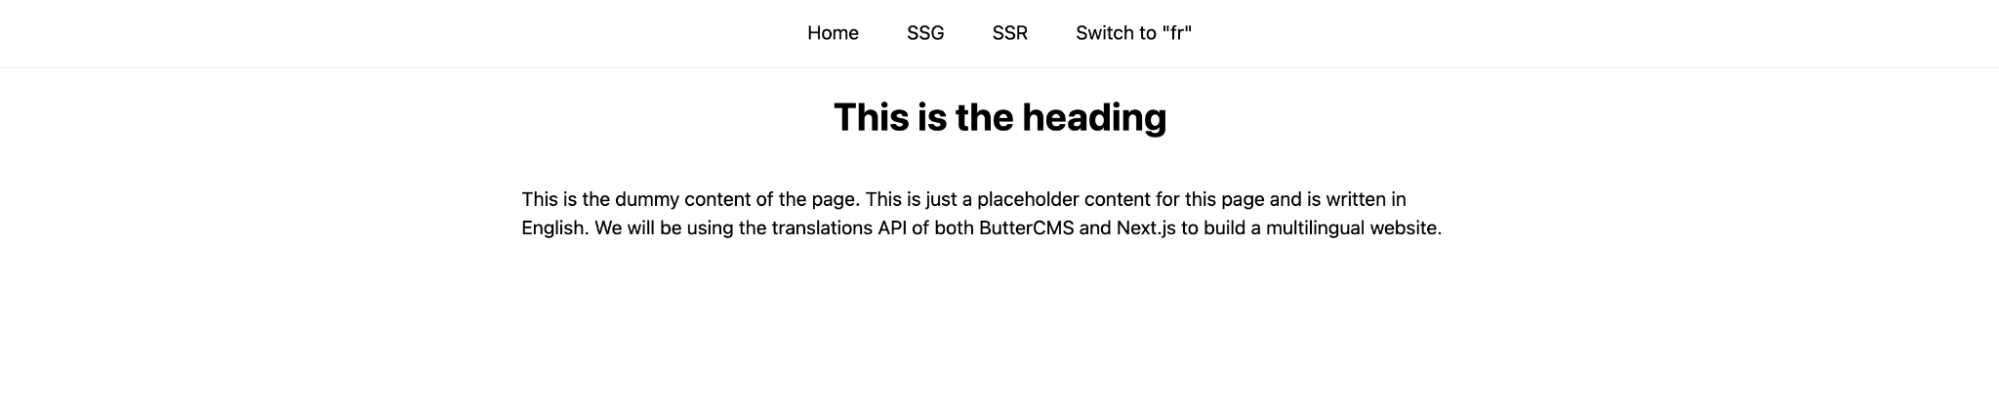 Screenshot: This is a heading page with a top navbar